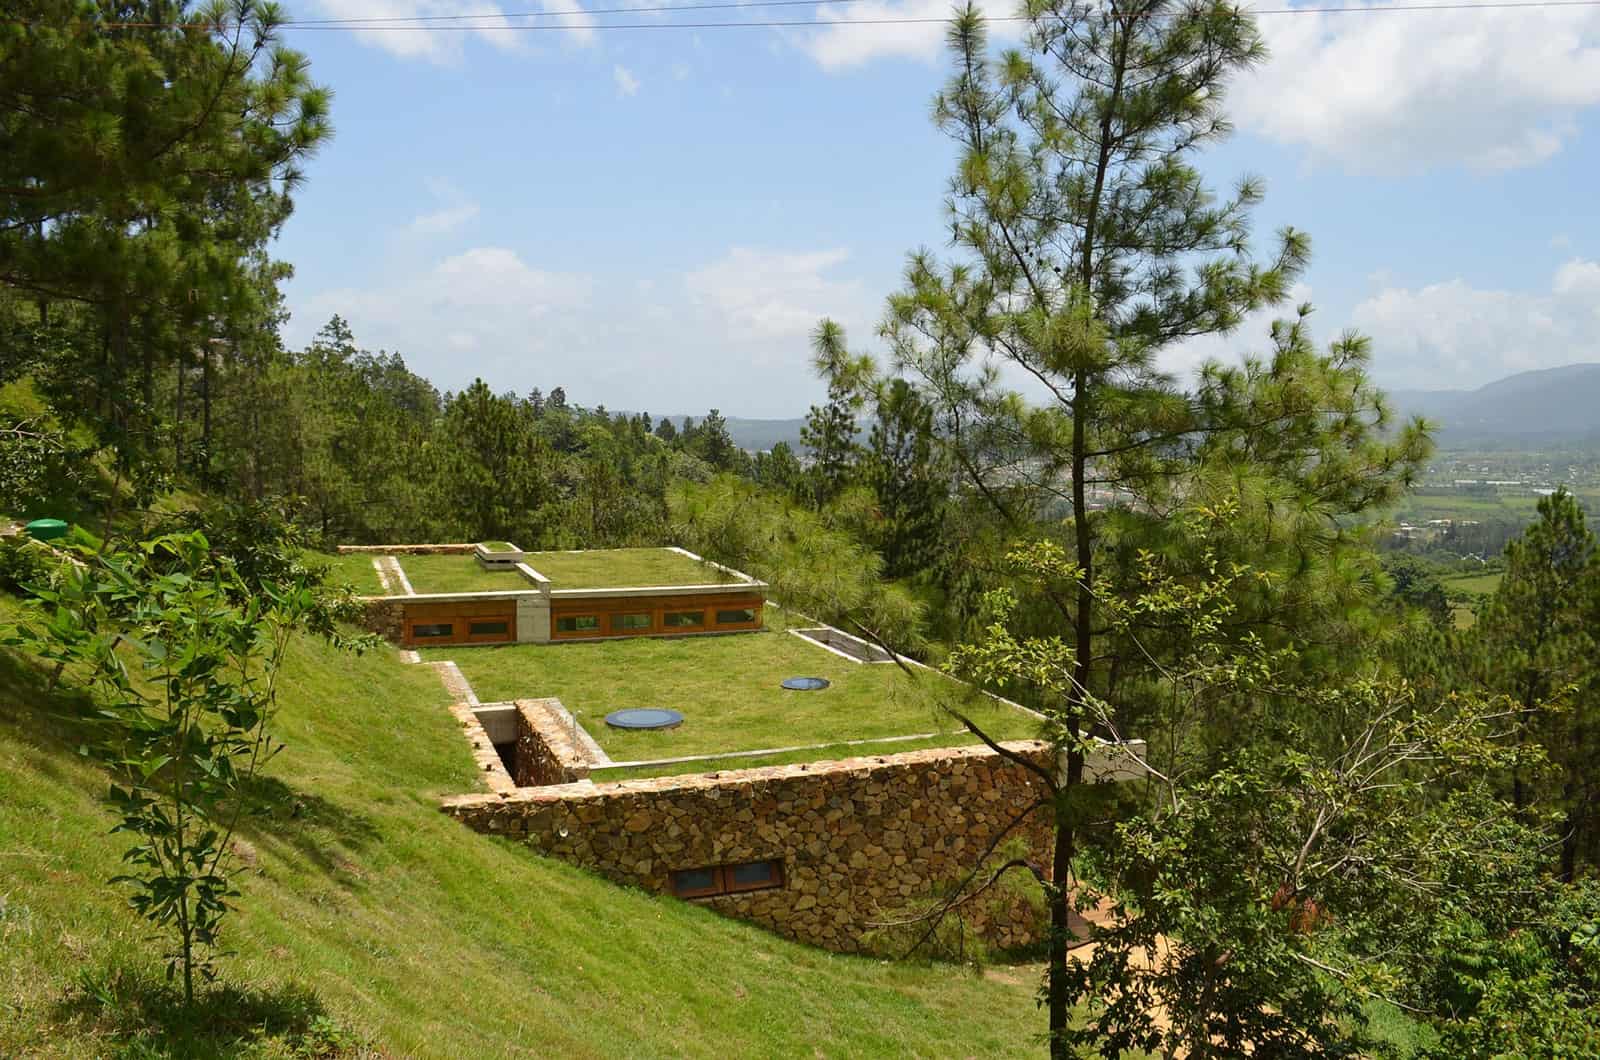 Grass Roofed Home Built into Slope uses Hillside for Cooling